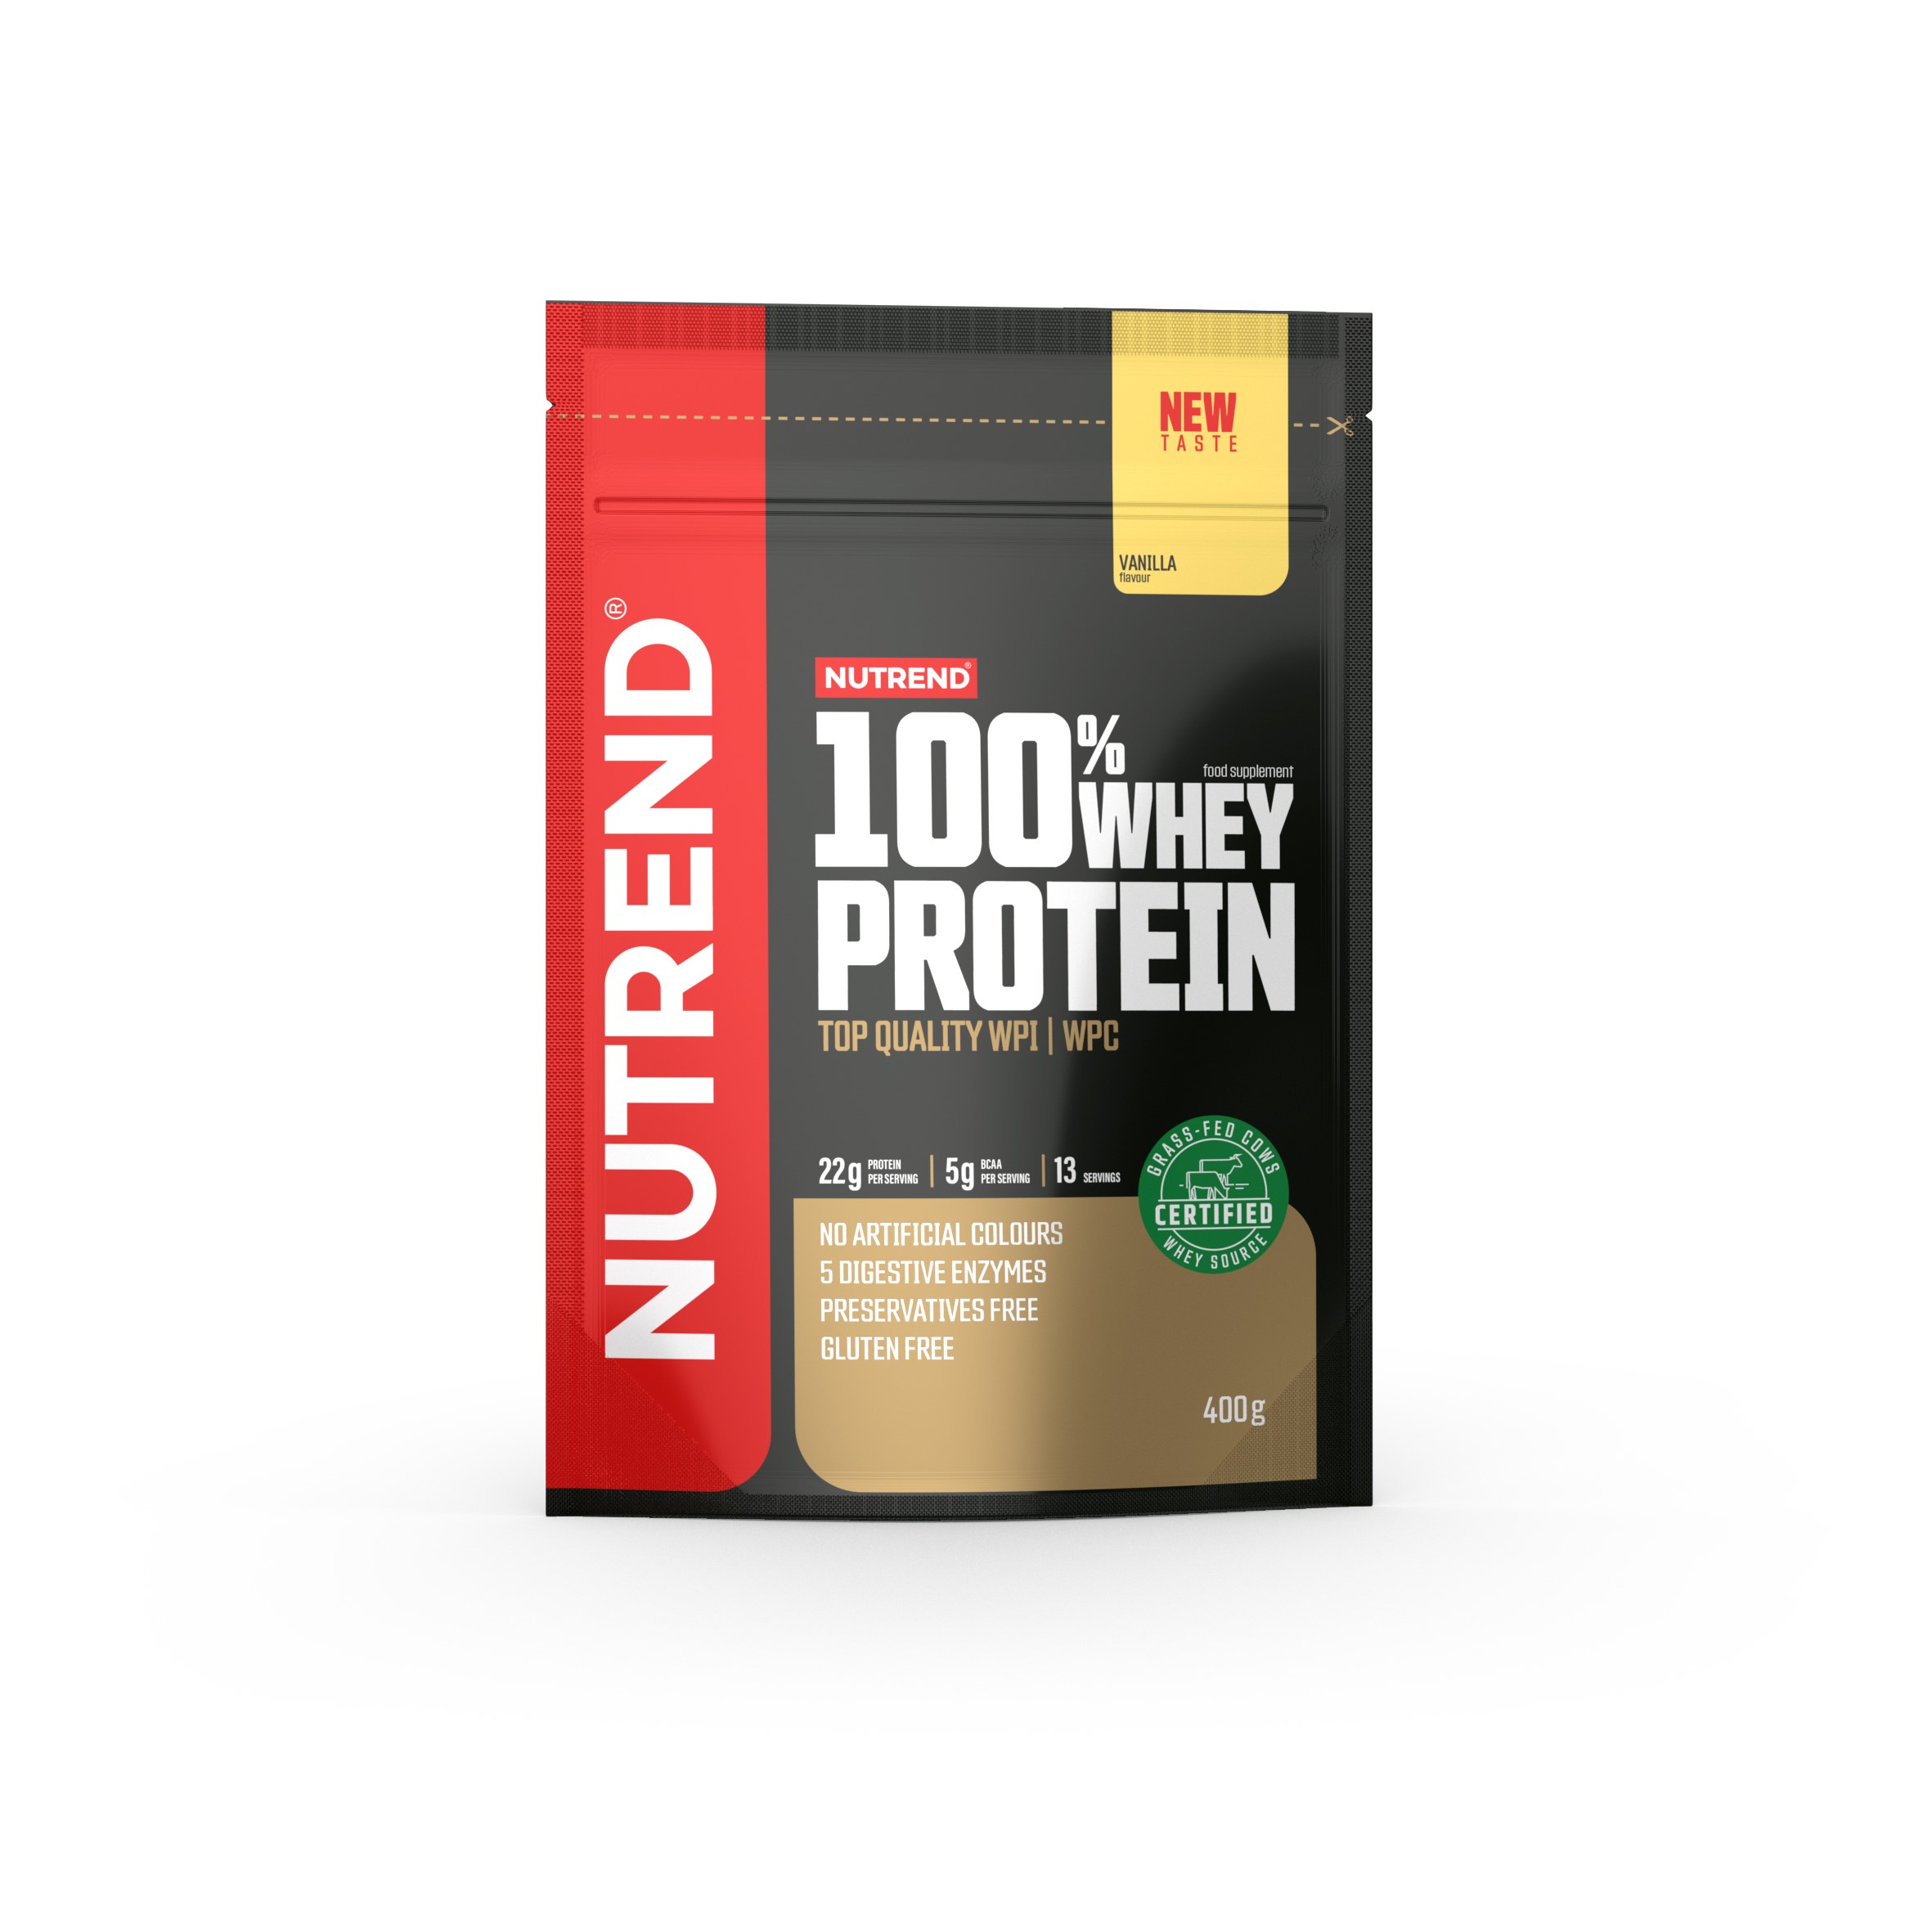 Concentrate Proteice - Nutrend 100% WHEY PROTEIN 400g White Chocolate Coconut, advancednutrition.ro